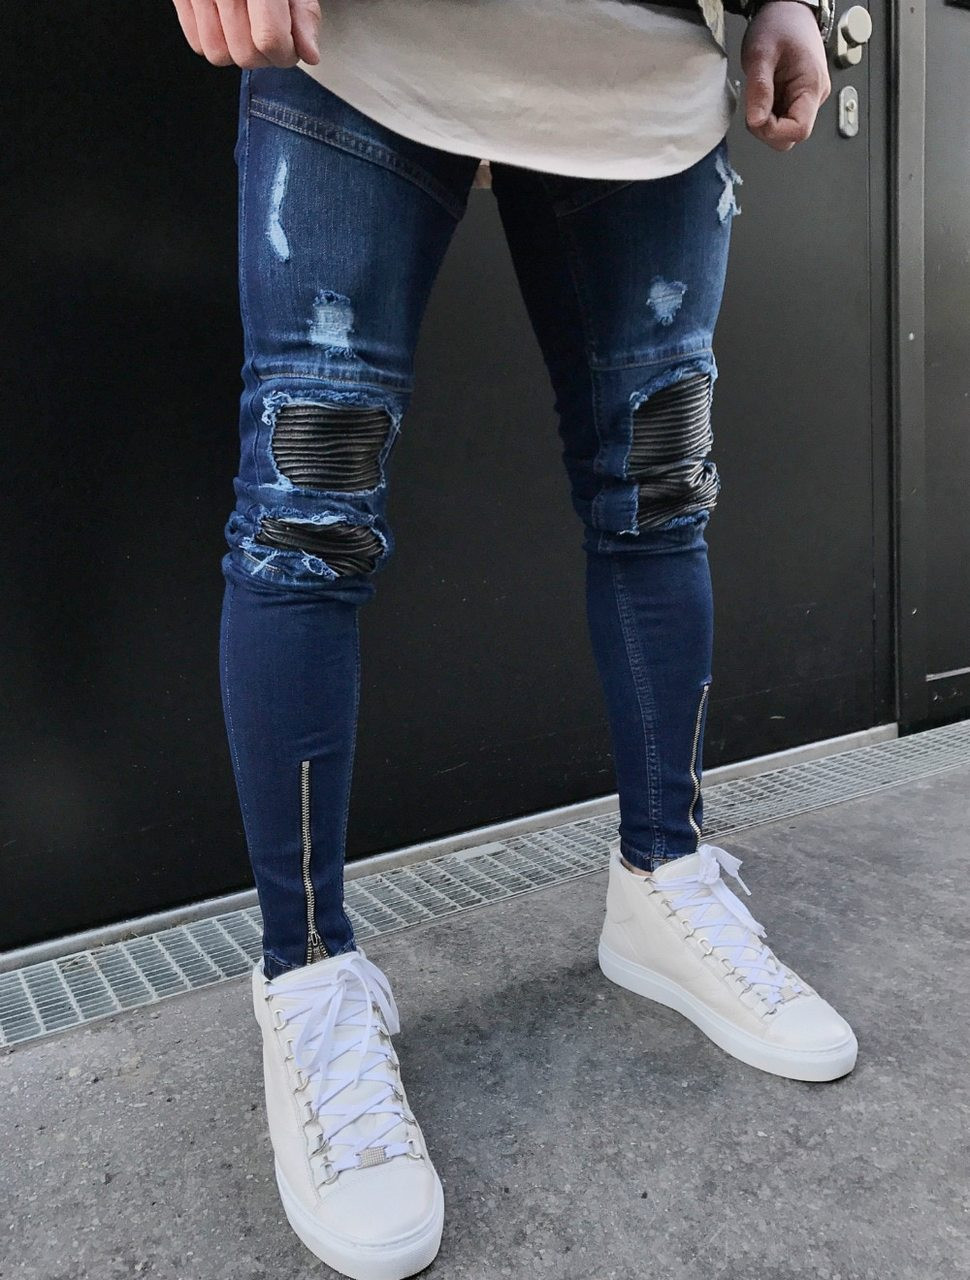 Men's Casual Ripped Jeans Autumn Slim Fit Skinny Distressed Destroyed  Zipper Holes Denim Pants (L, B Blue) : Amazon.in: Clothing & Accessories